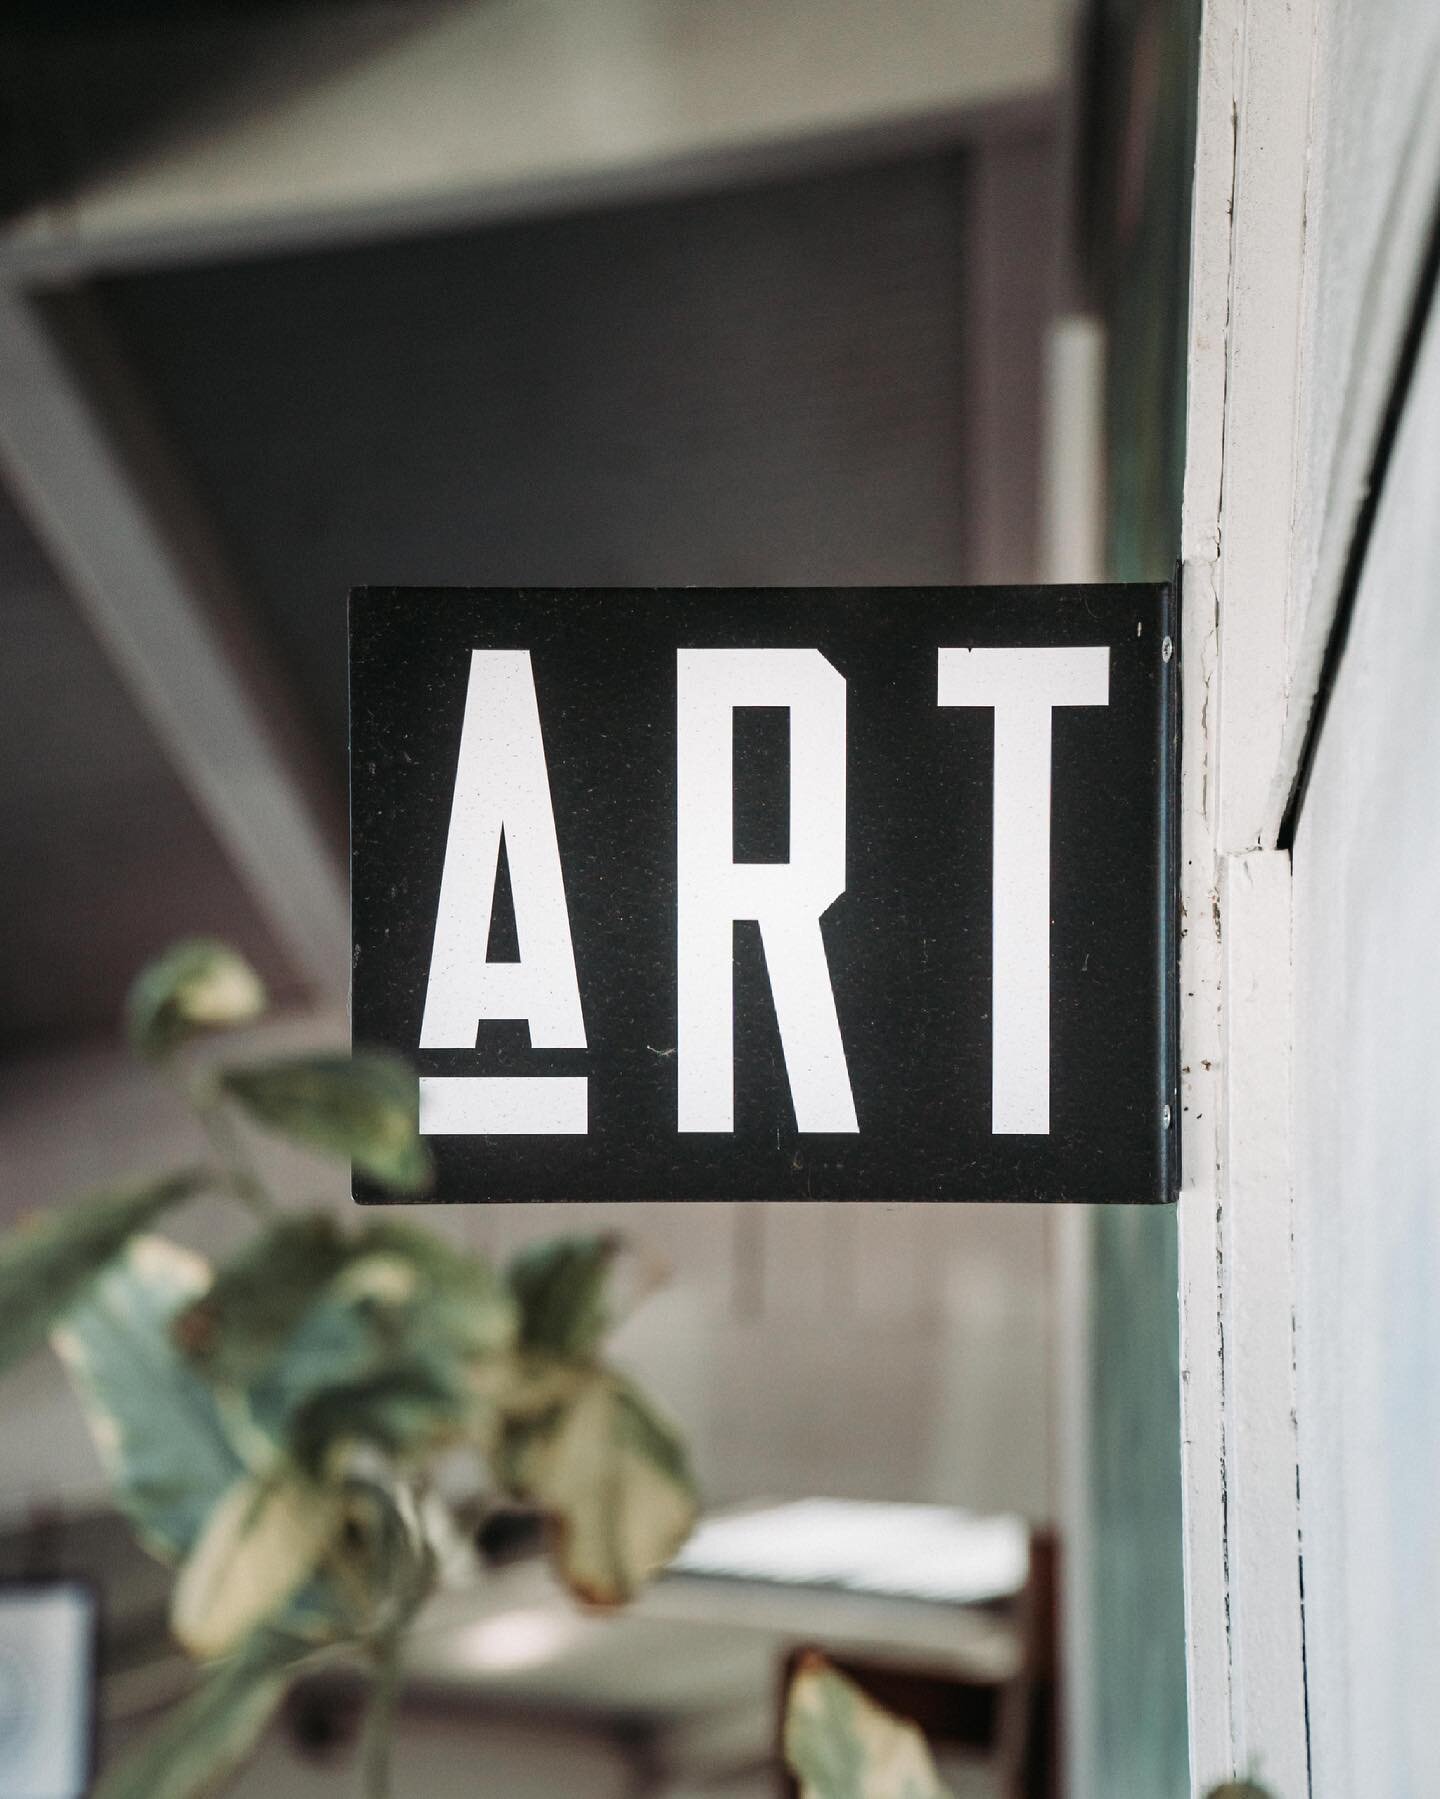 We give you the key of your own gallery. Your own blank space to highlight and sell your art in the best conditions.

More infos : www.lapetitegalerie.co.nz

#raglanart #raglanartist #artistnz #waikato #raglan #artgallery